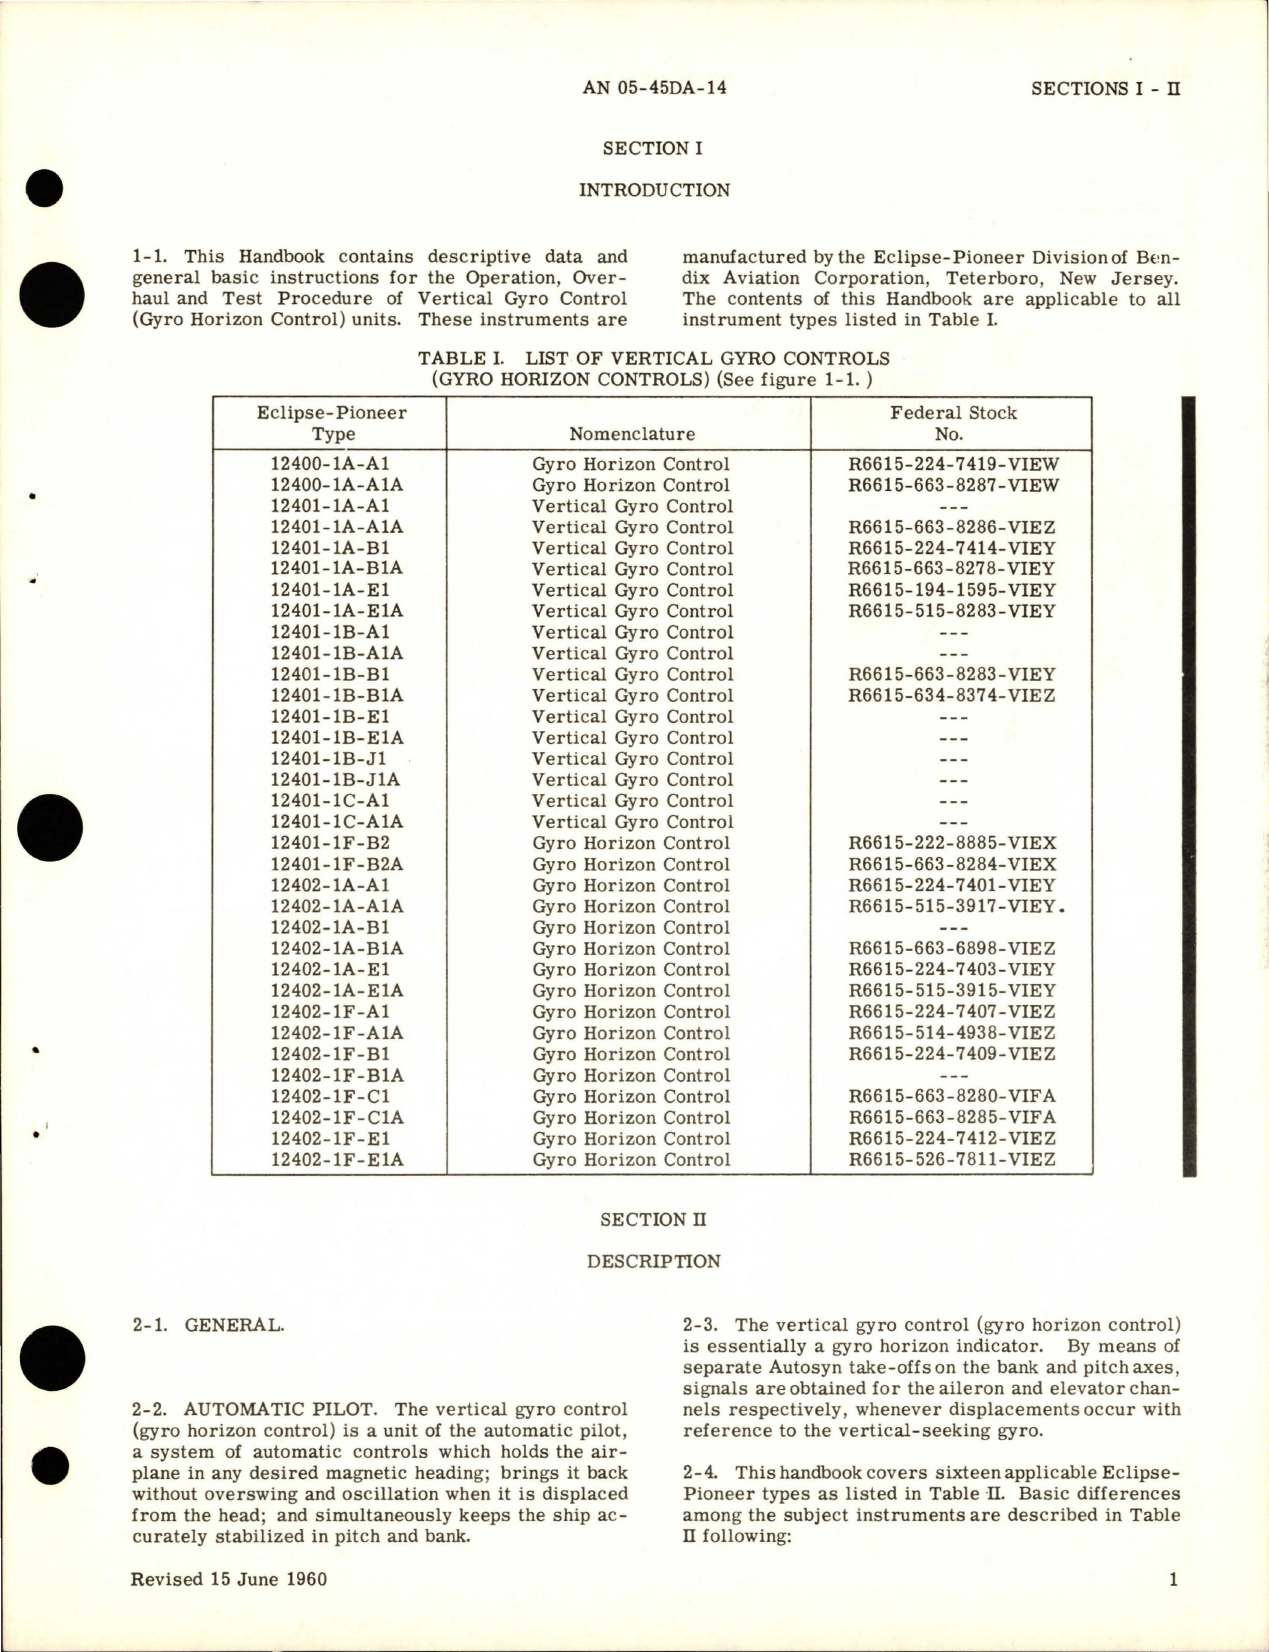 Sample page 5 from AirCorps Library document: Overhaul Instructions for Vertical Gyro Controls